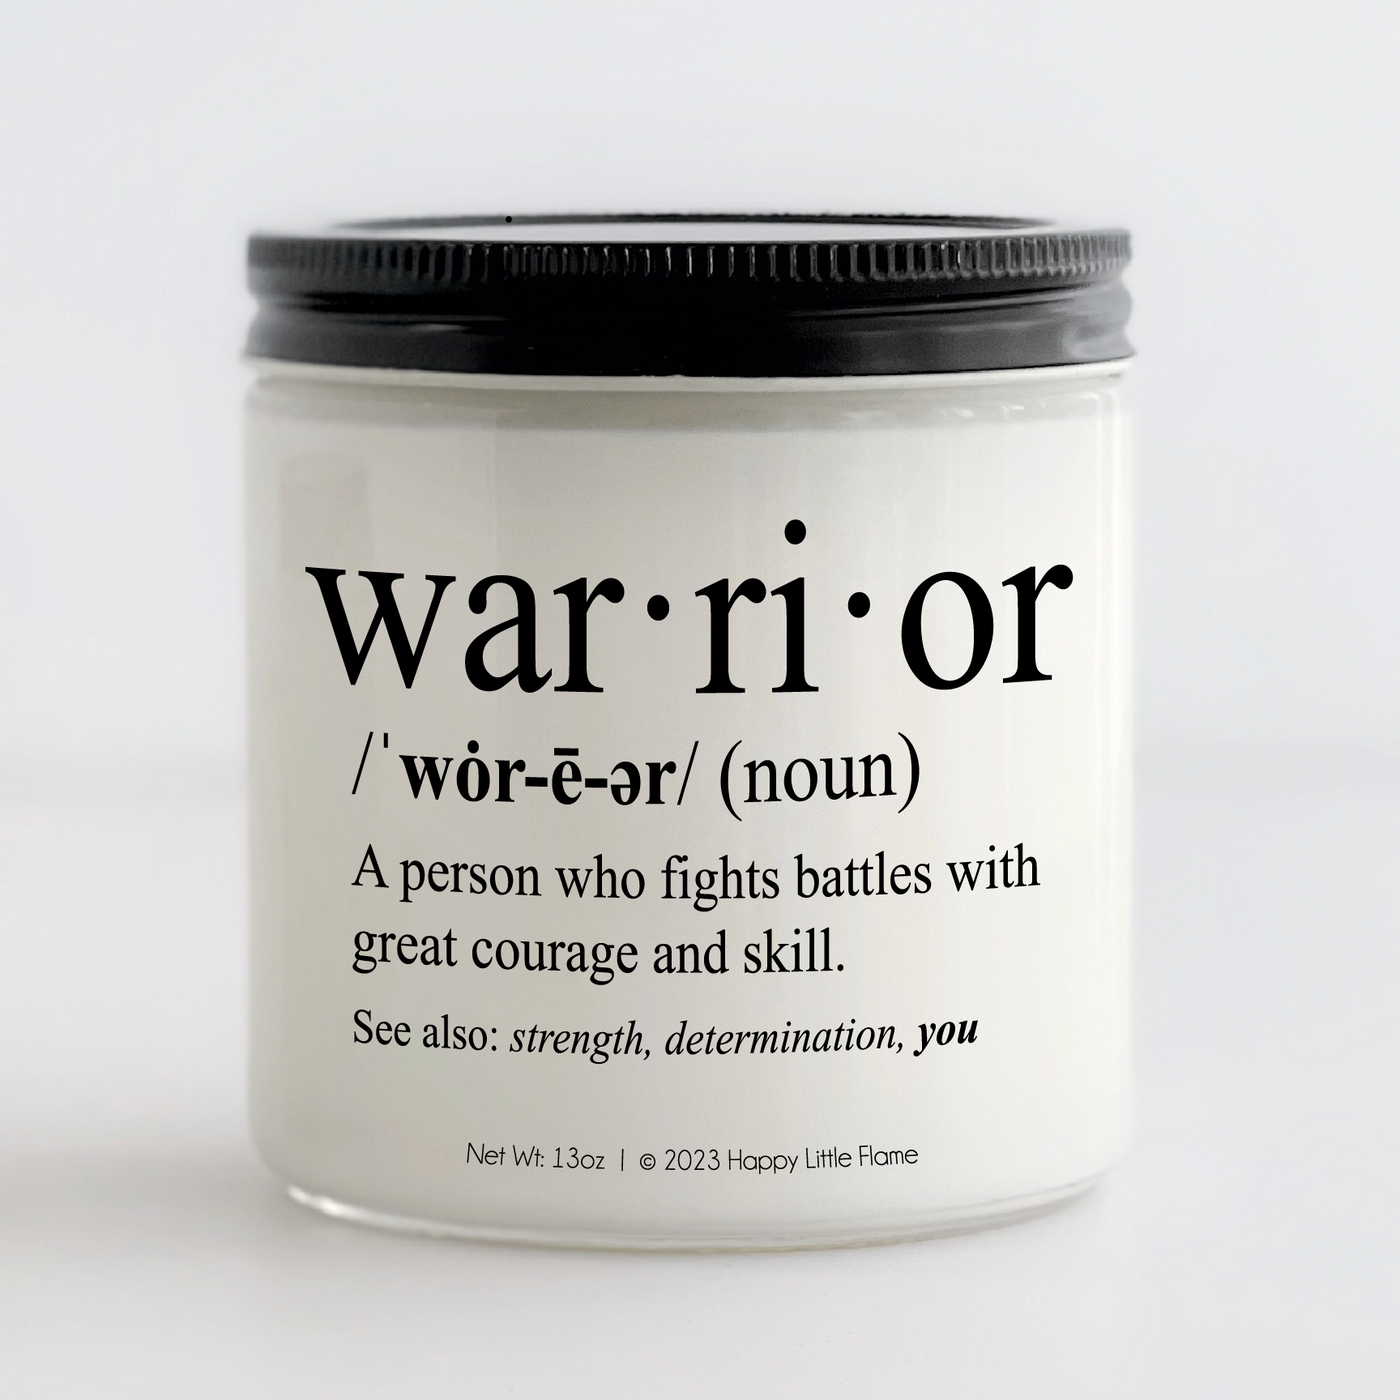 Warrior - Definition, Meaning & Synonyms